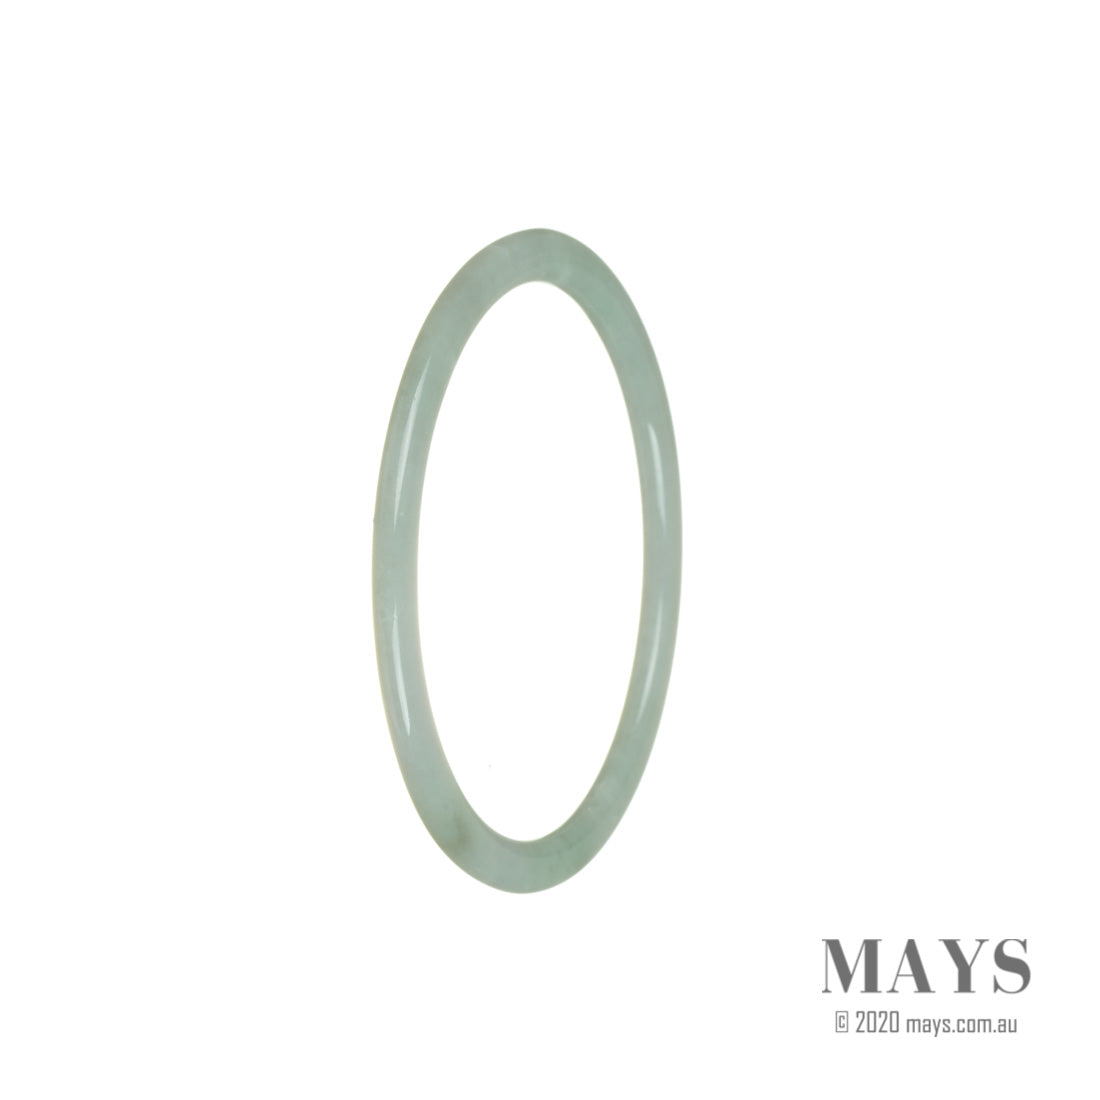 A beautiful light green jade bracelet with a thin design, measuring 57mm in size. Crafted with real grade A jade, this bracelet from MAYS is a stunning accessory.